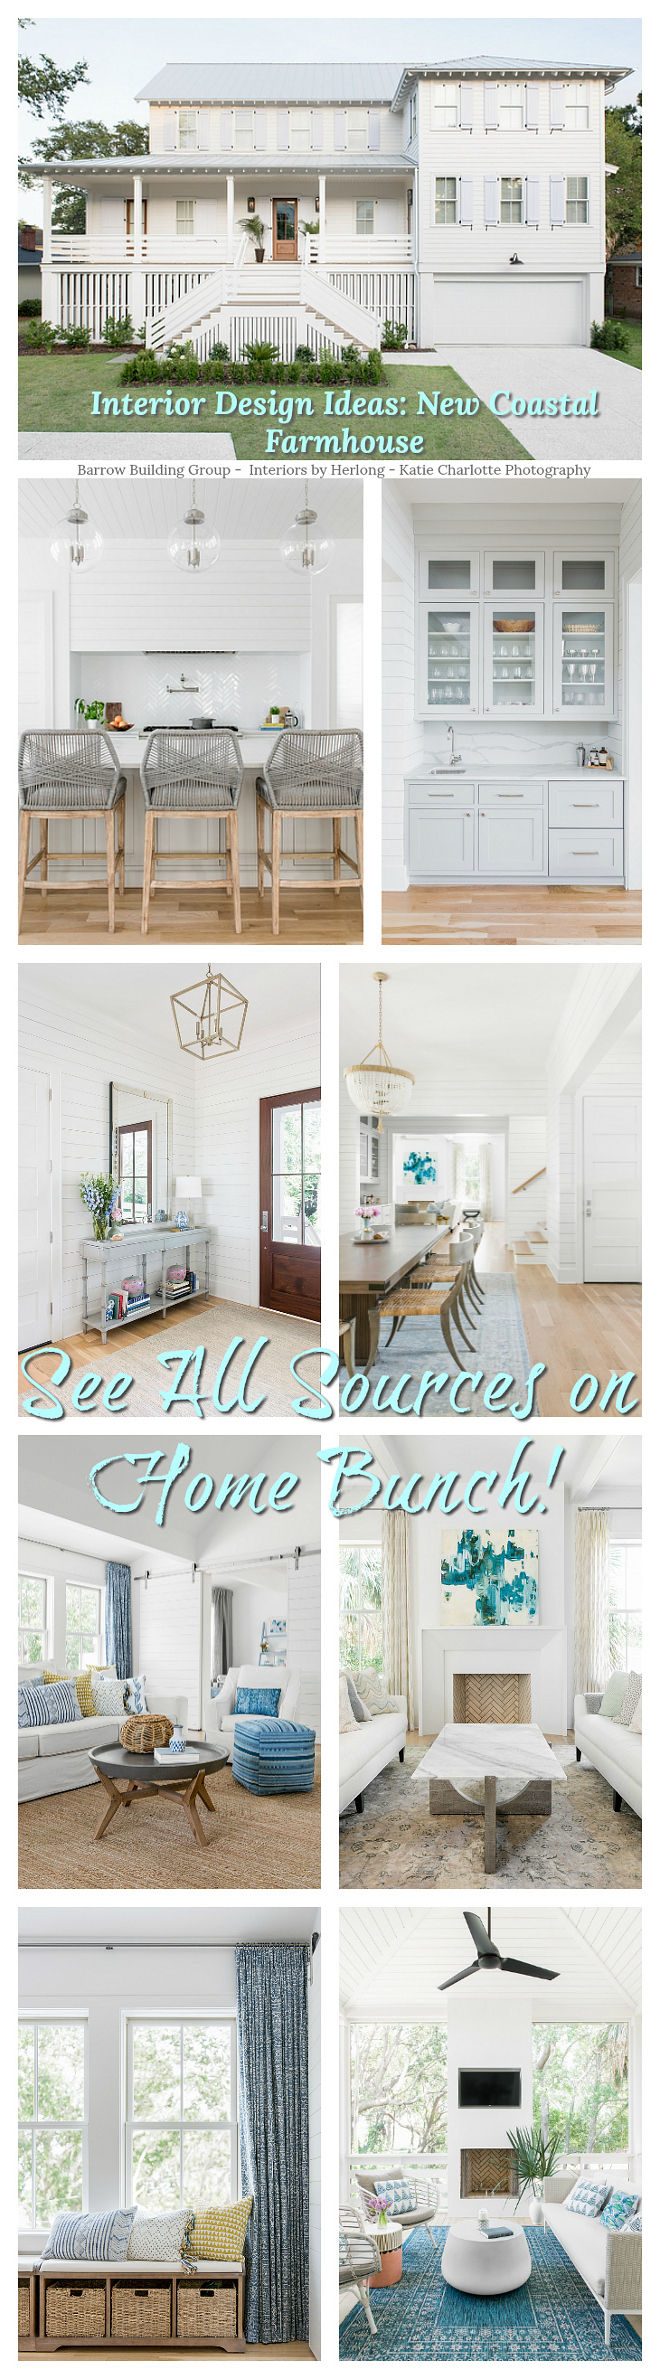 Interior Design Ideas New Coastal Farmhouse see sources and paint colors on Home Bunch 